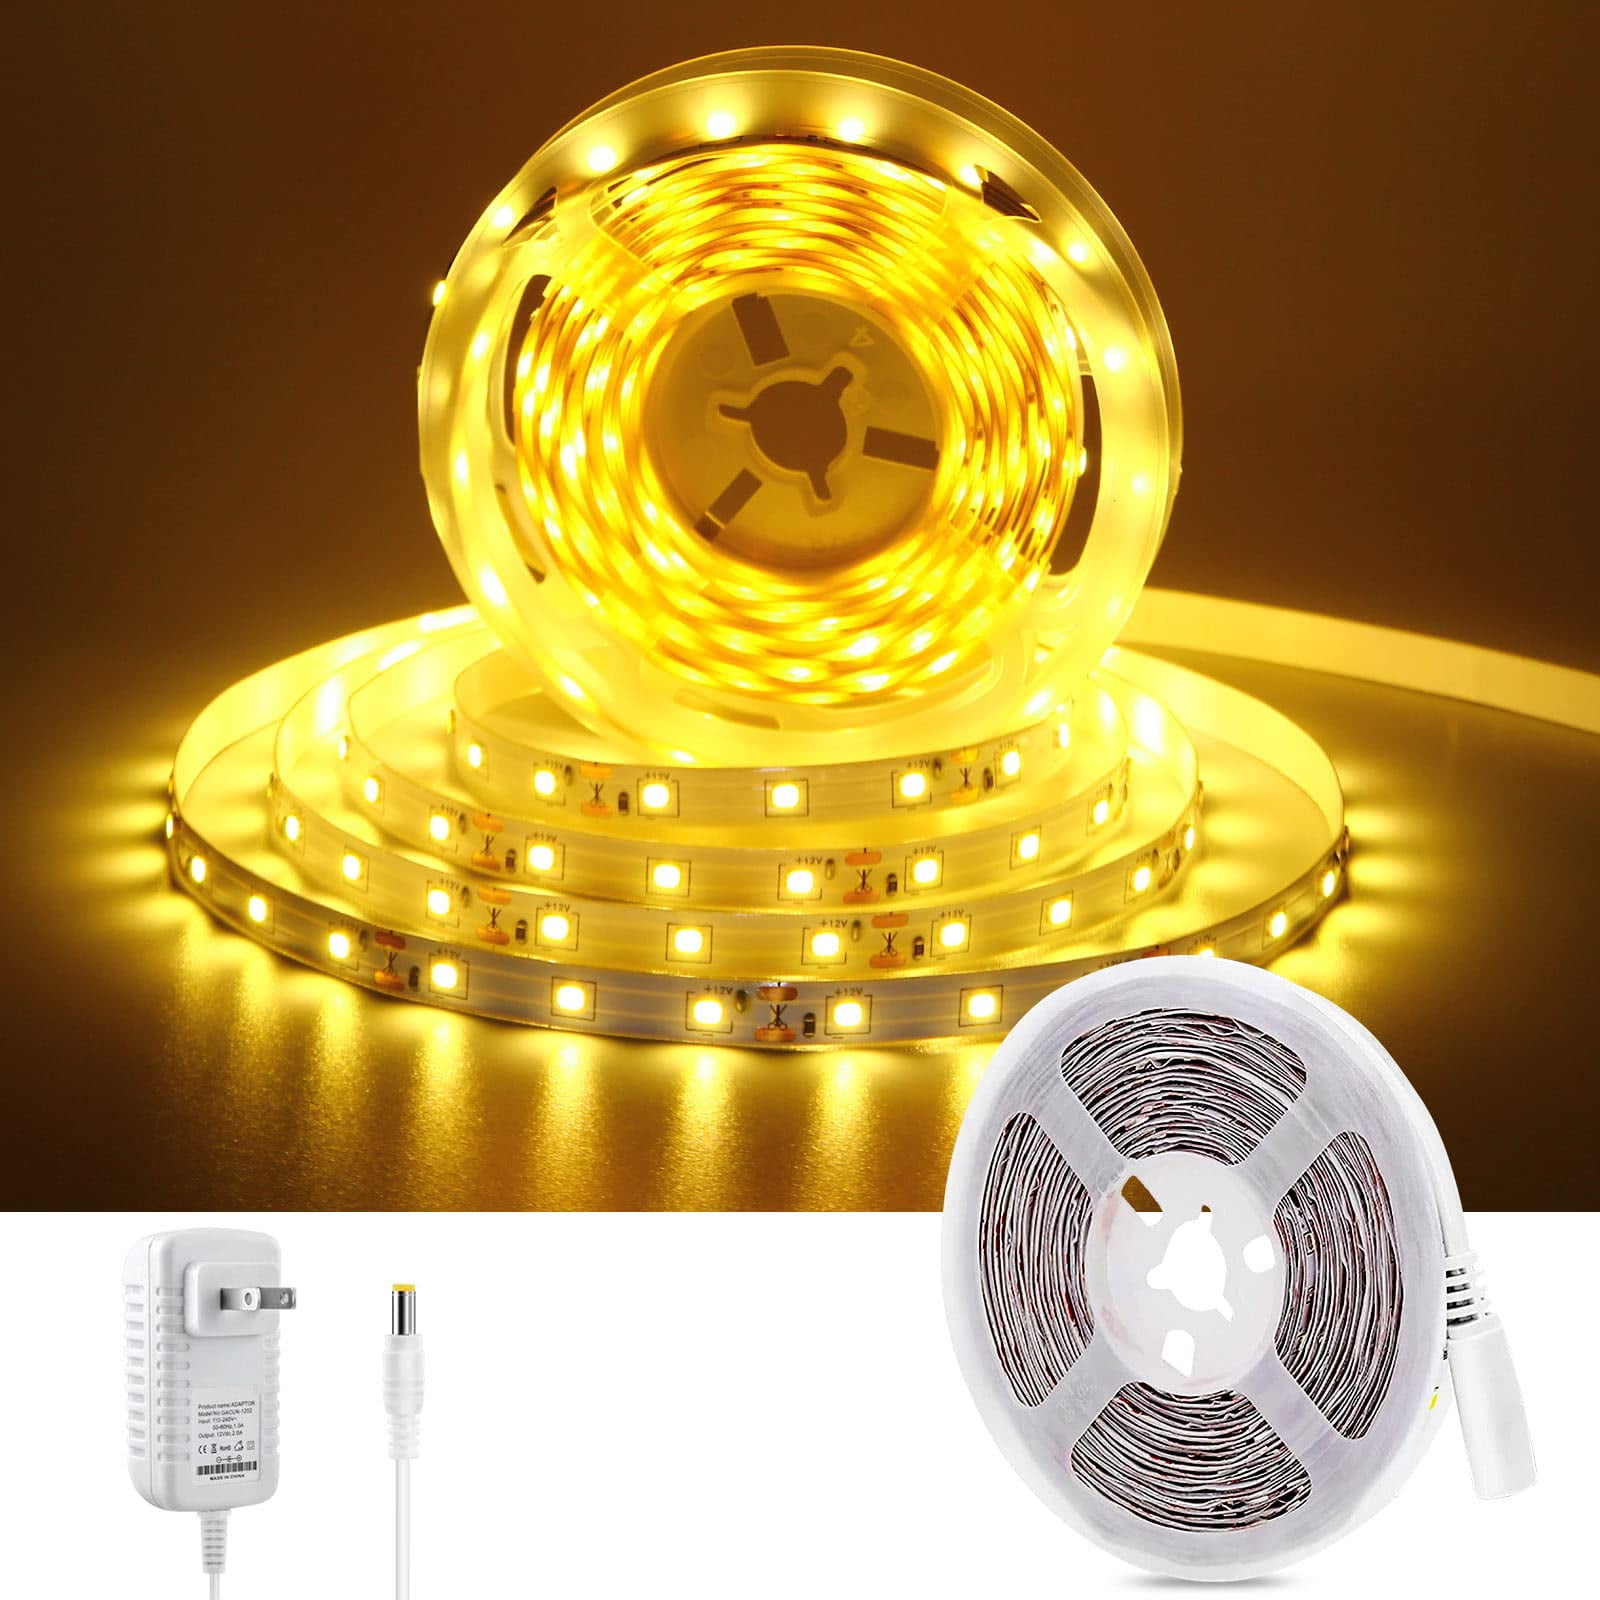 Inspired LED - Light Strip - Cut and Connect Kit - Normal Bright Pure White  4200K - 39.5 ft / 12M - Strip Lighting LED - Dimmable led